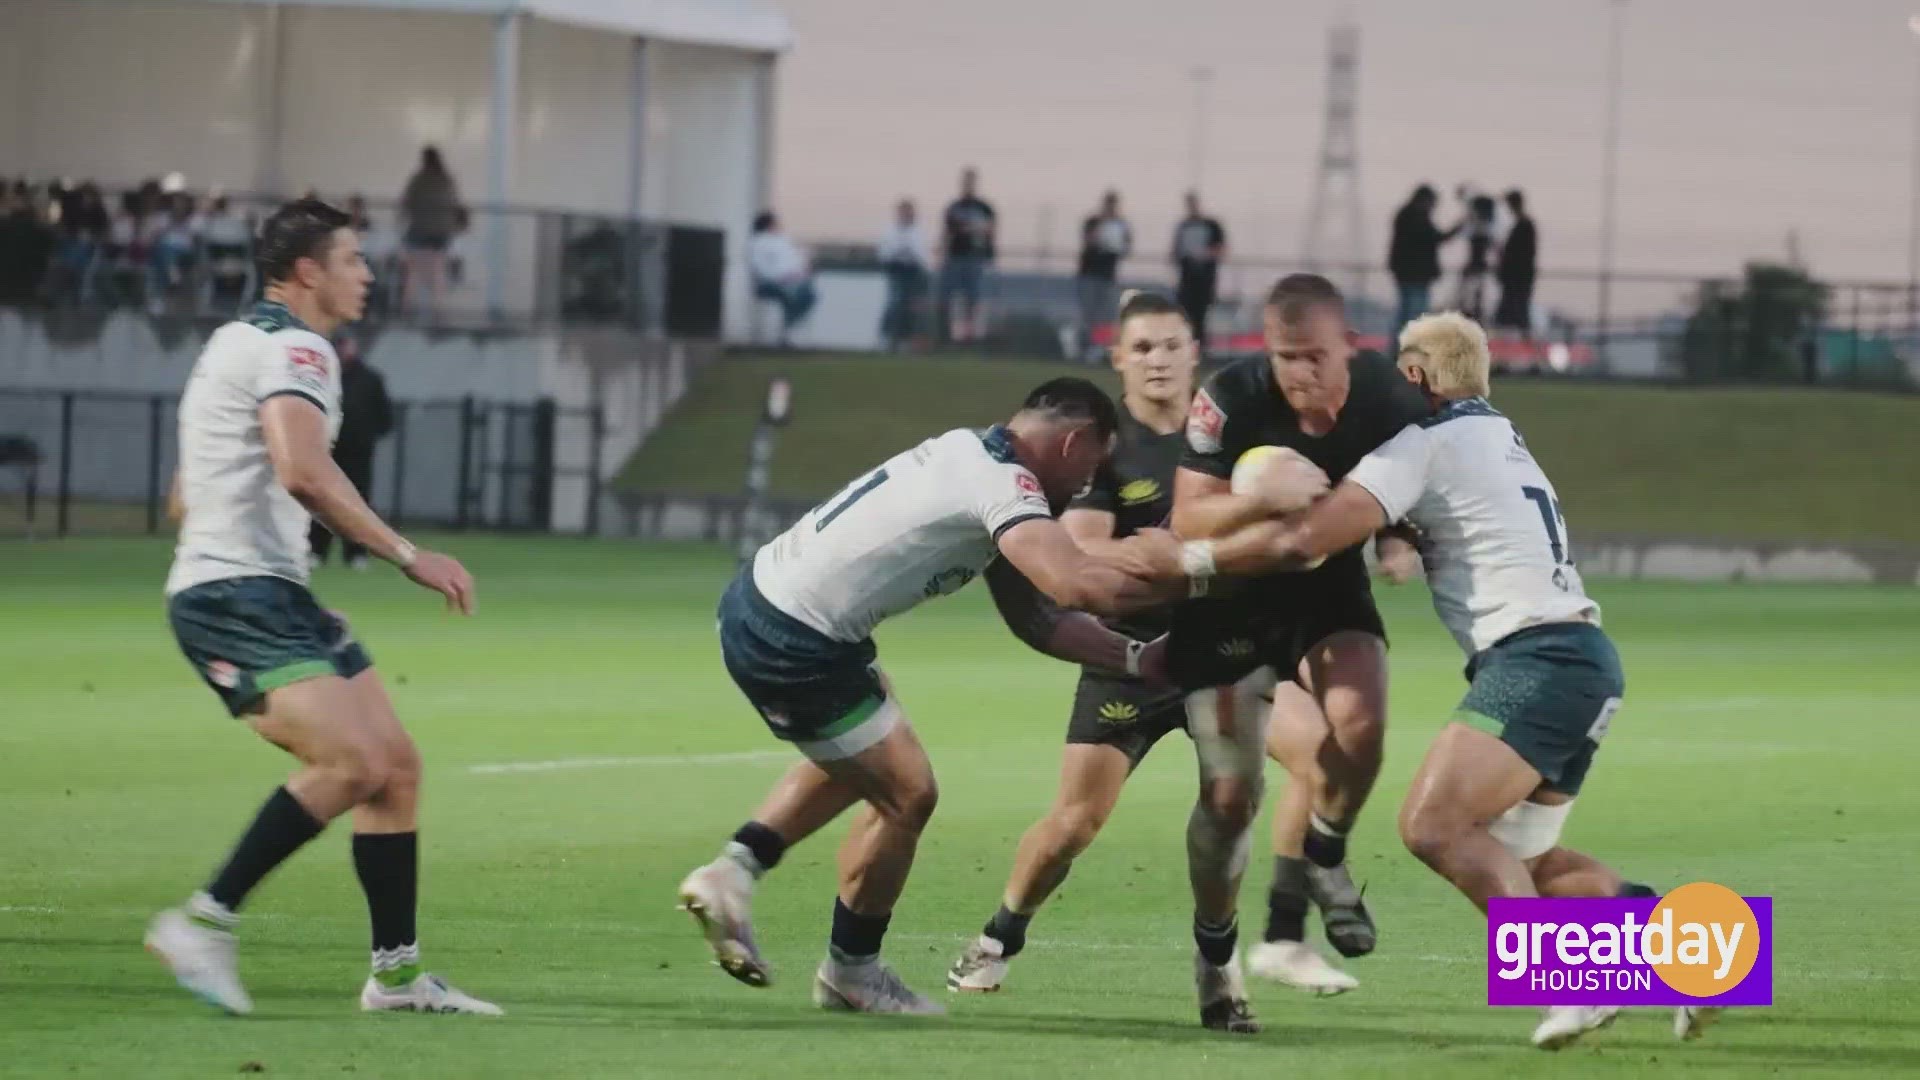 Great Day's Carlos Hernandez caught up with the SaberCats ahead of its season opener.